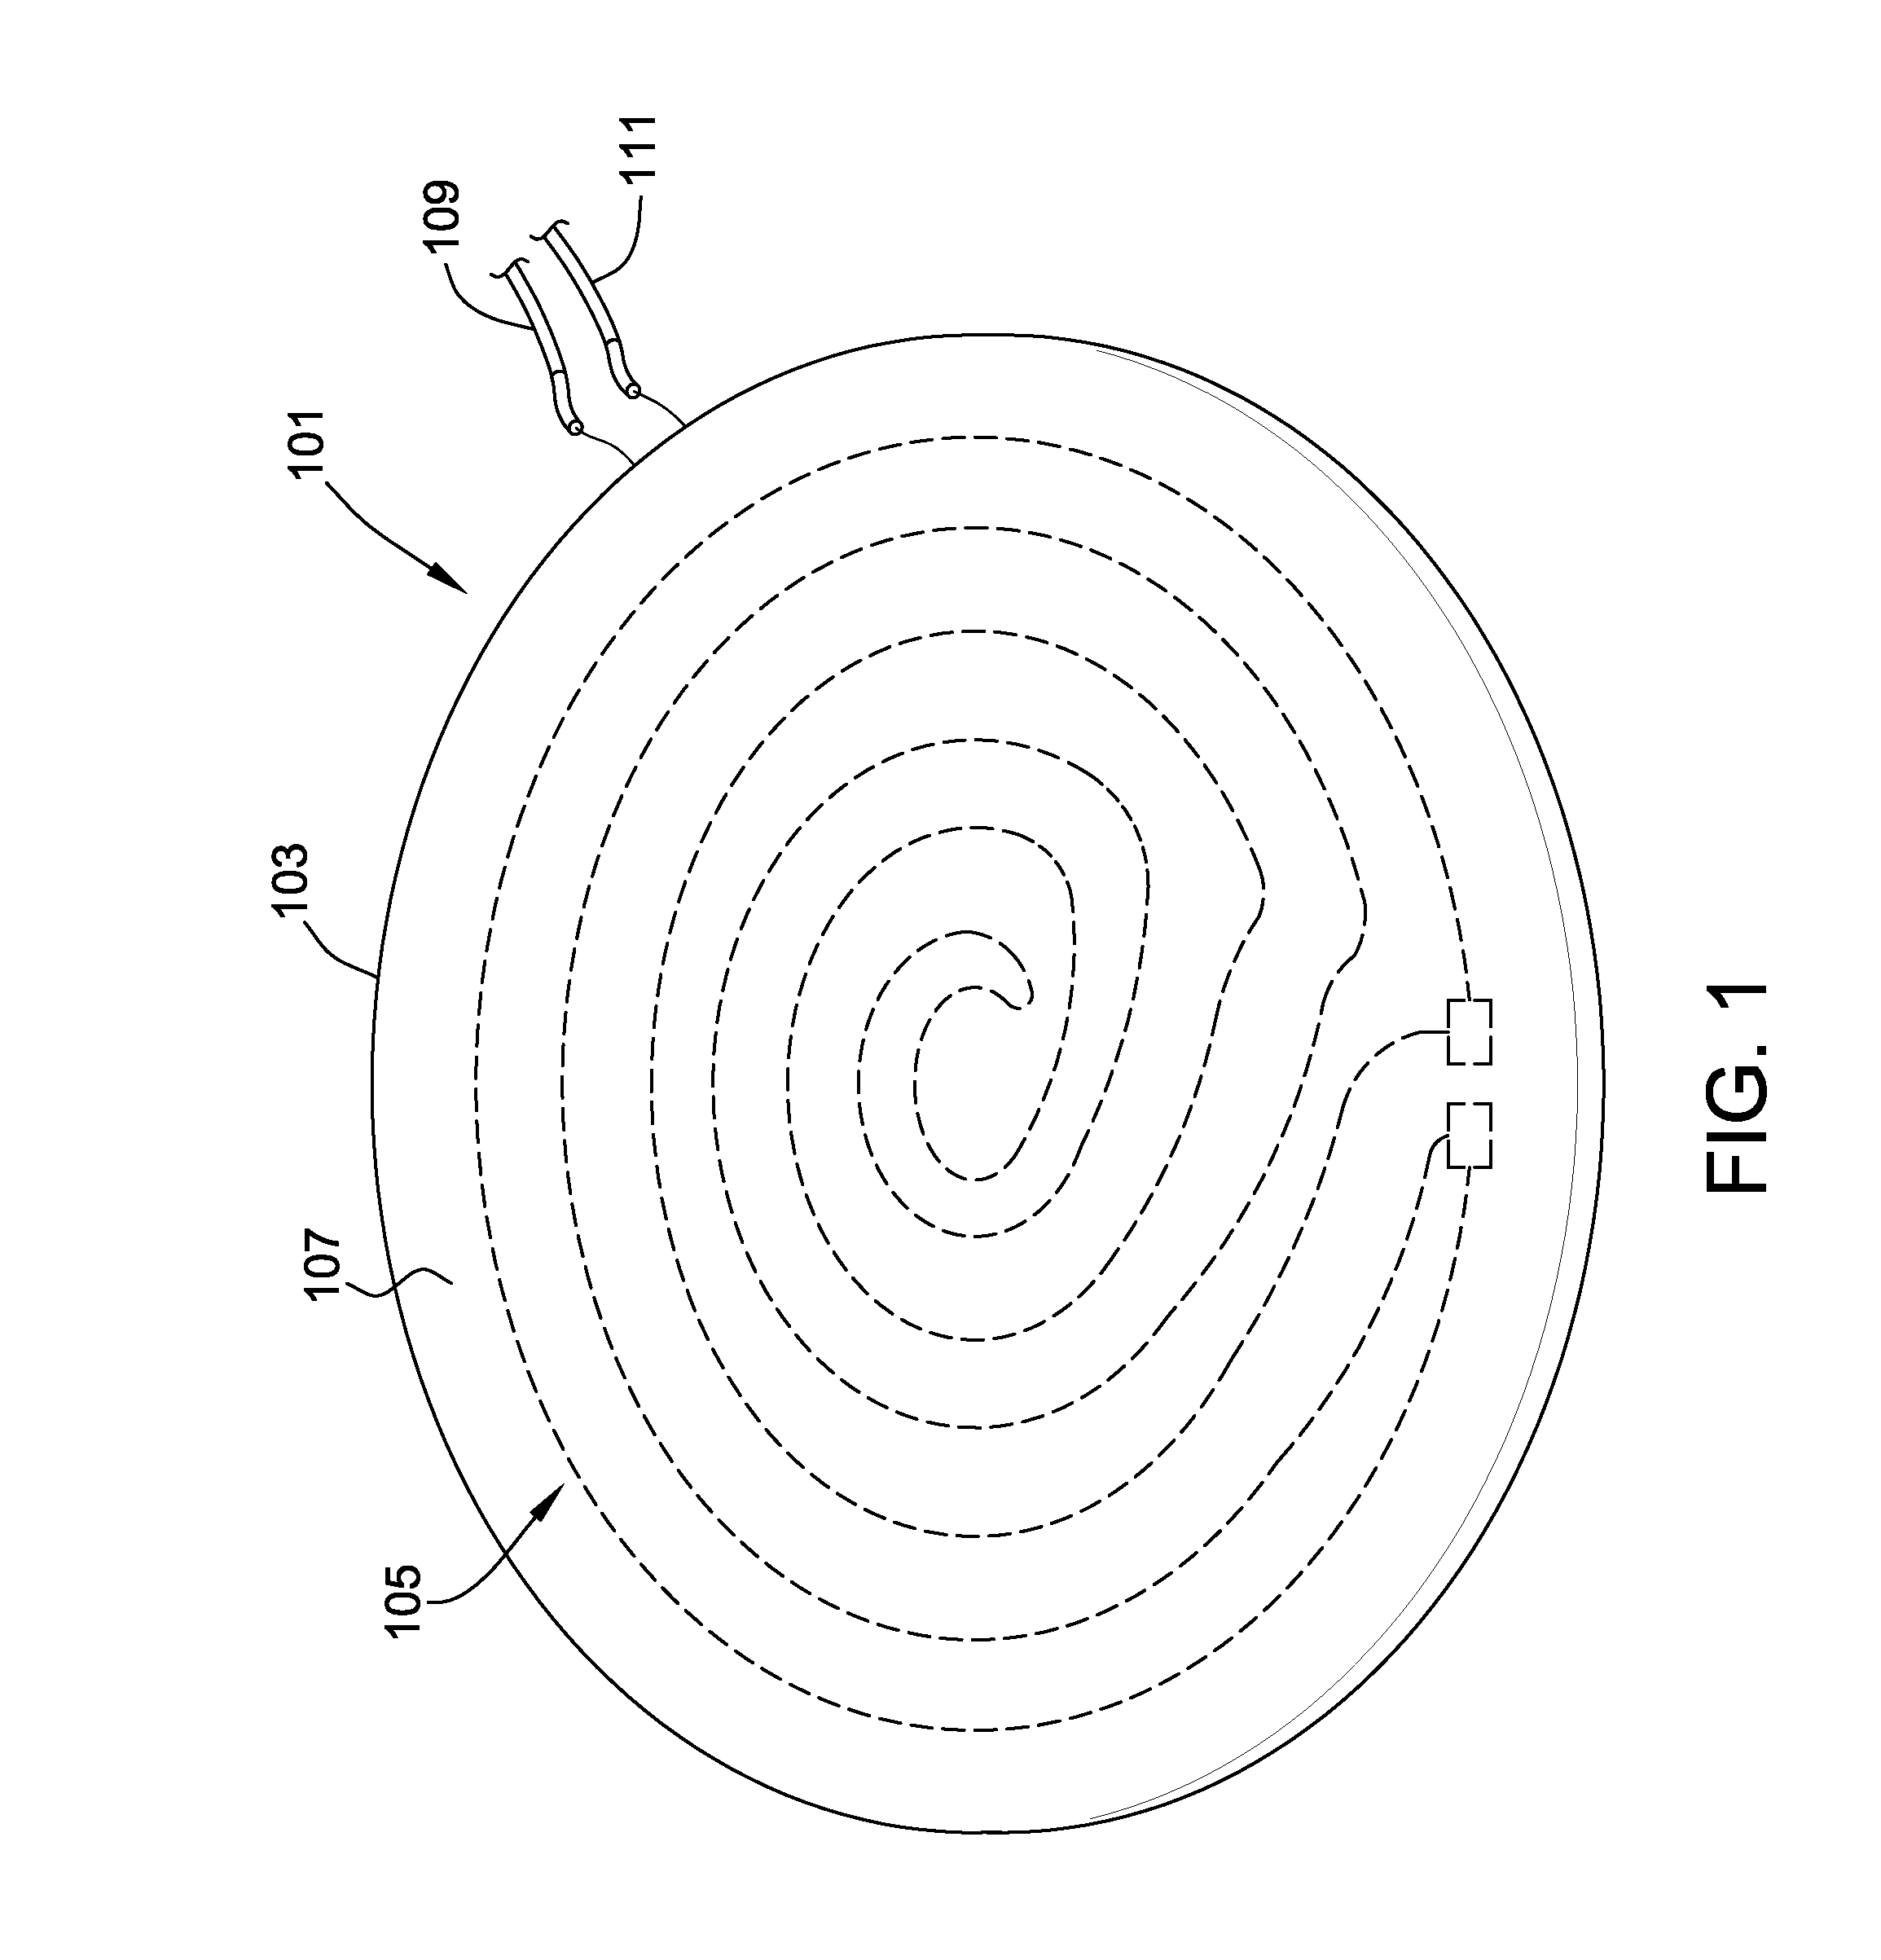 Cooking Appliance With Baking Plate Having Embedded Heating Element